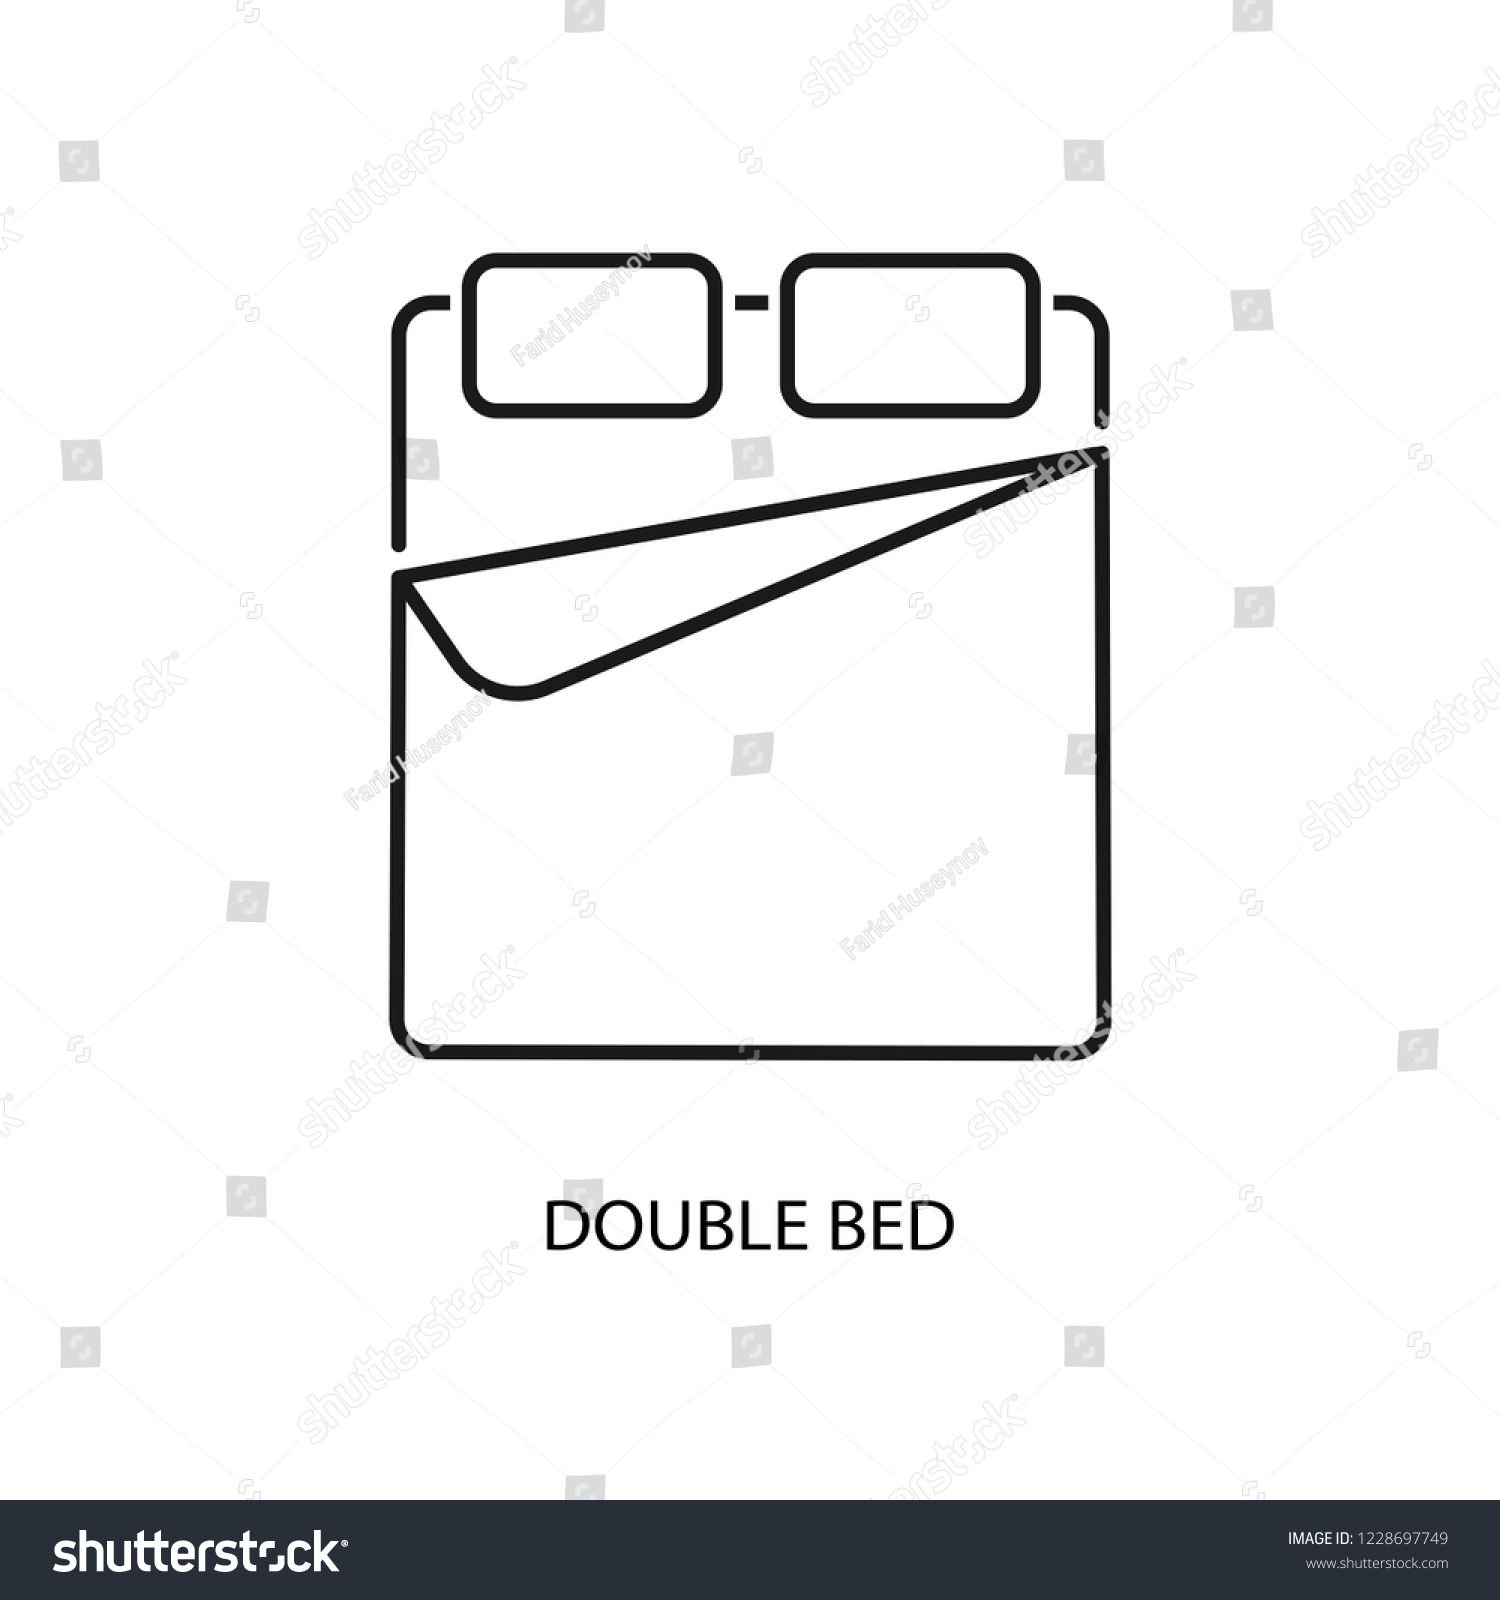 Double Bed Flat Line Vector Icon Stock Vector Royalty Free 1228697749 Shutterstock 3041